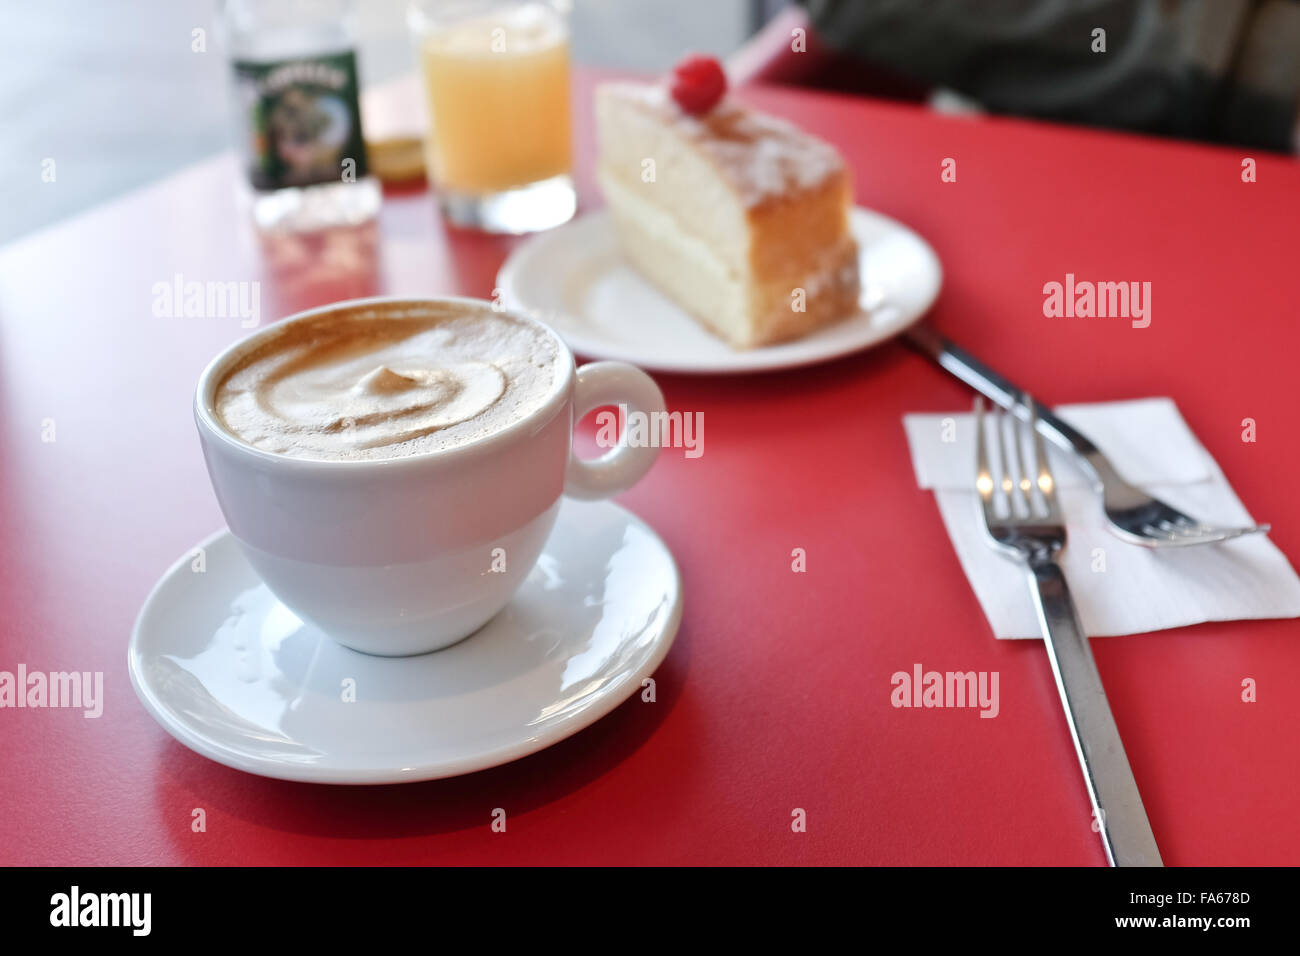 Cappuccino and cake on table Stock Photo